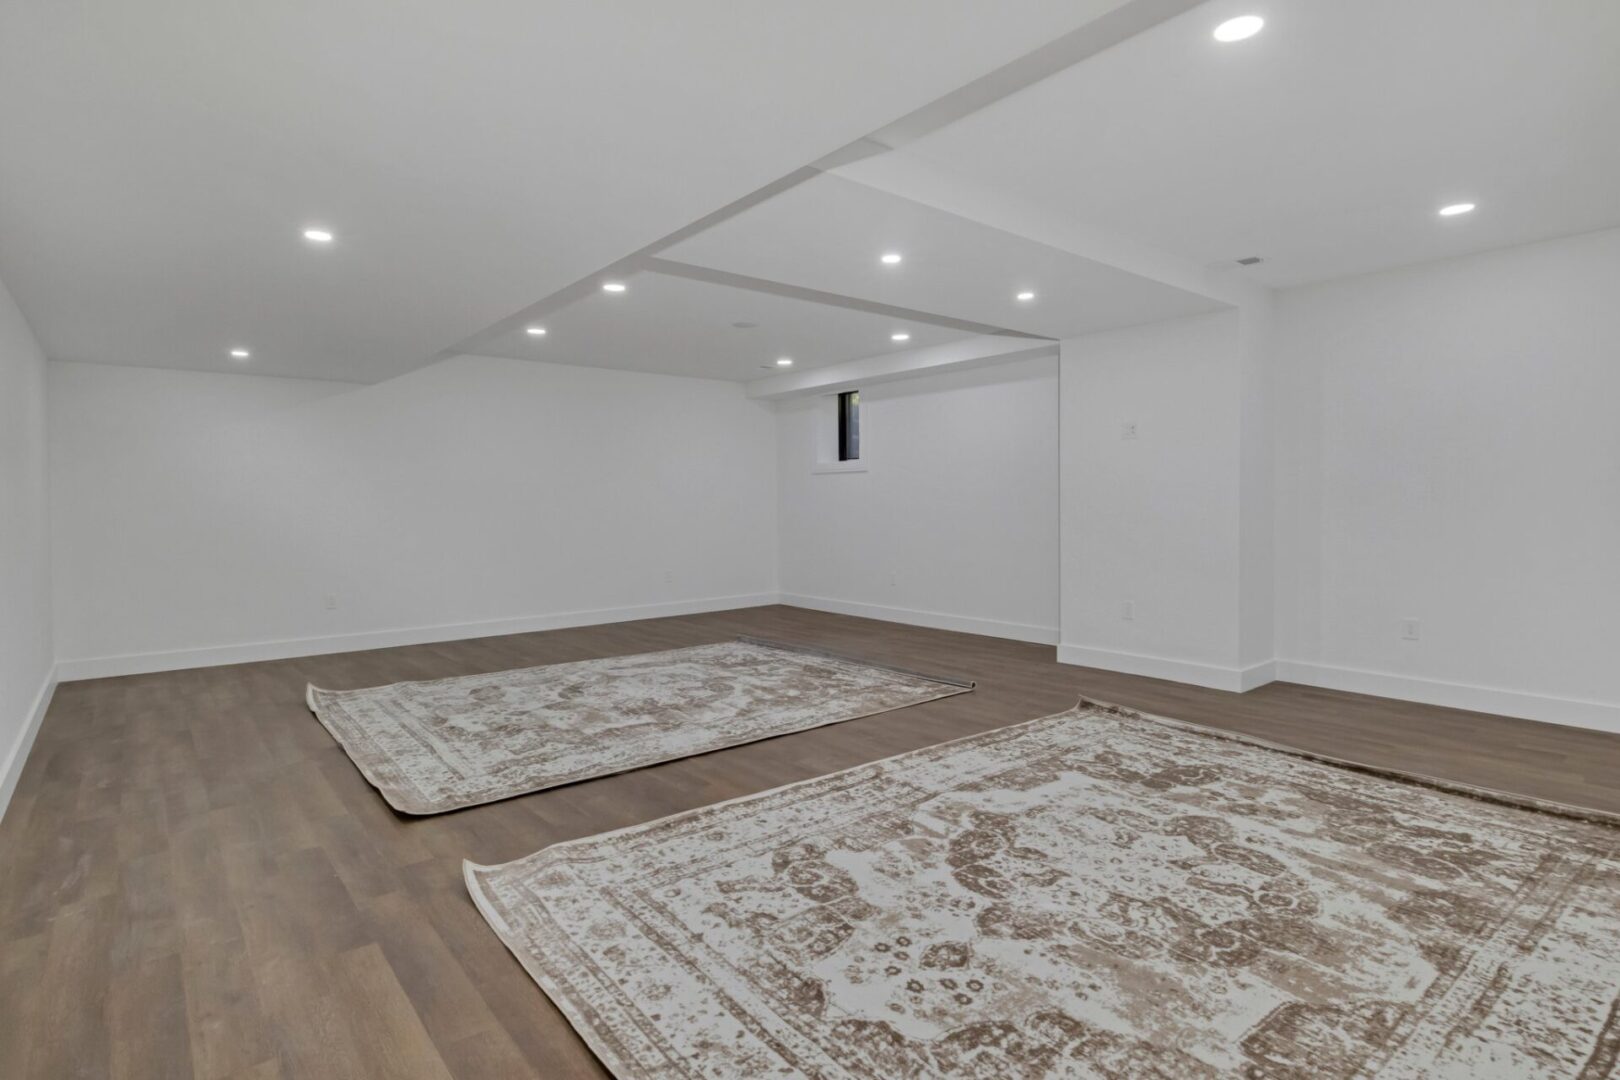 Two rugs in a room with white walls.